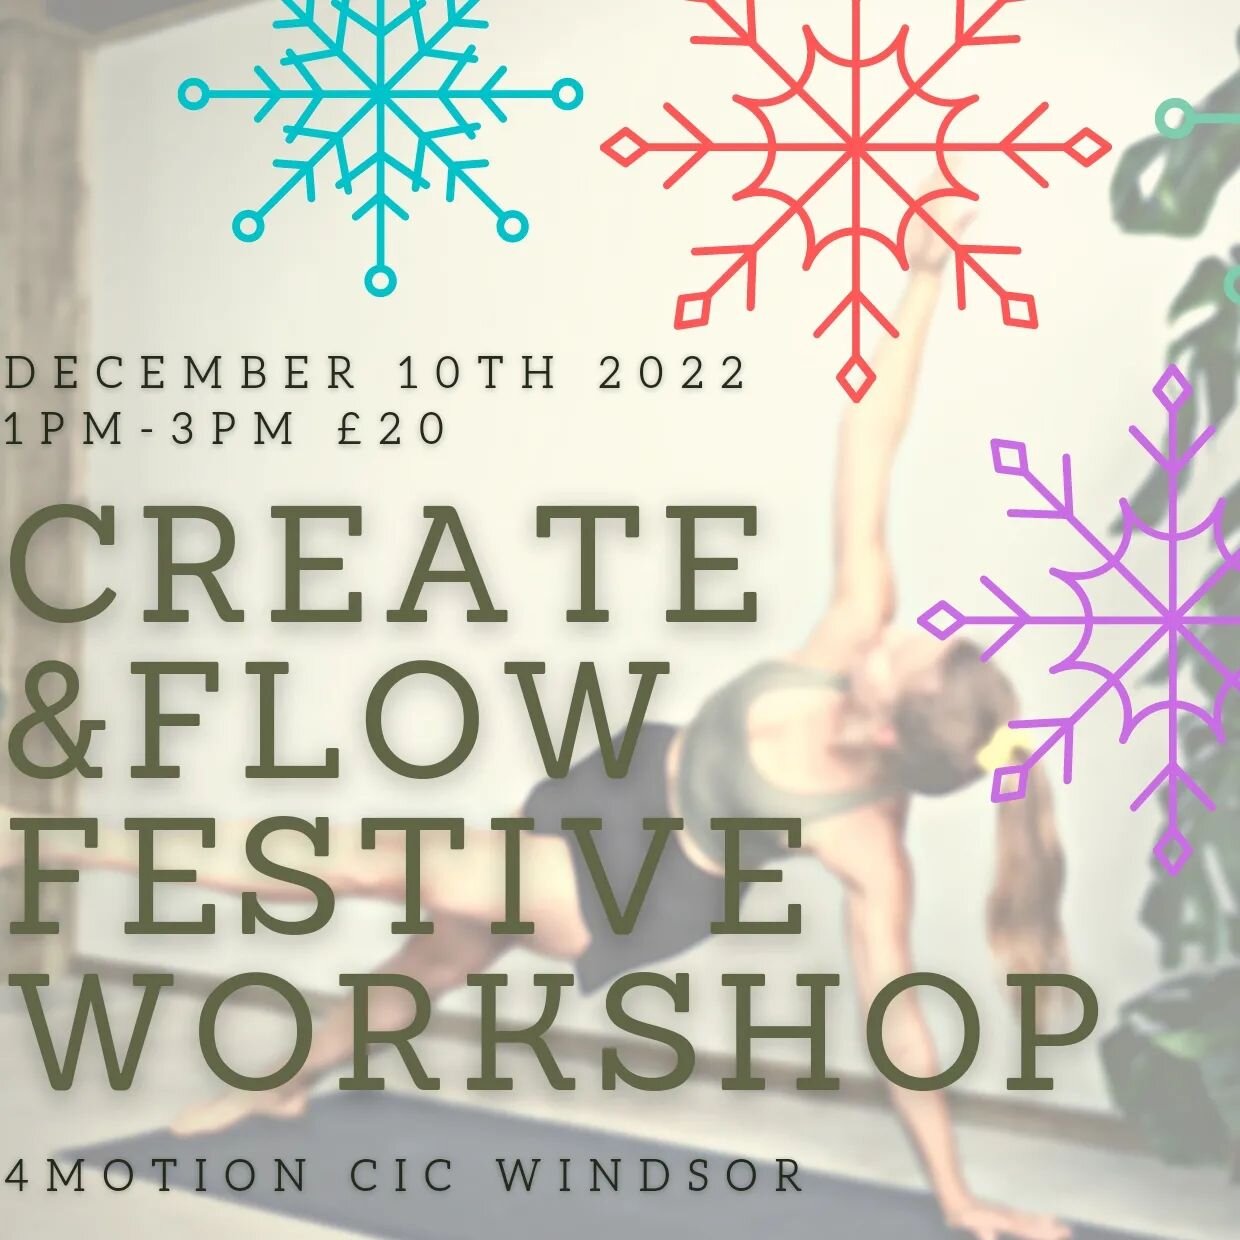 Movement helps to get our creativity flowing! Join me for this fun, festive flow, prepping your 🧠 ready for some seasonal crafty action!

In this session we will have some serious fun but this is not serious yoga - have your festive sparkles and Chr